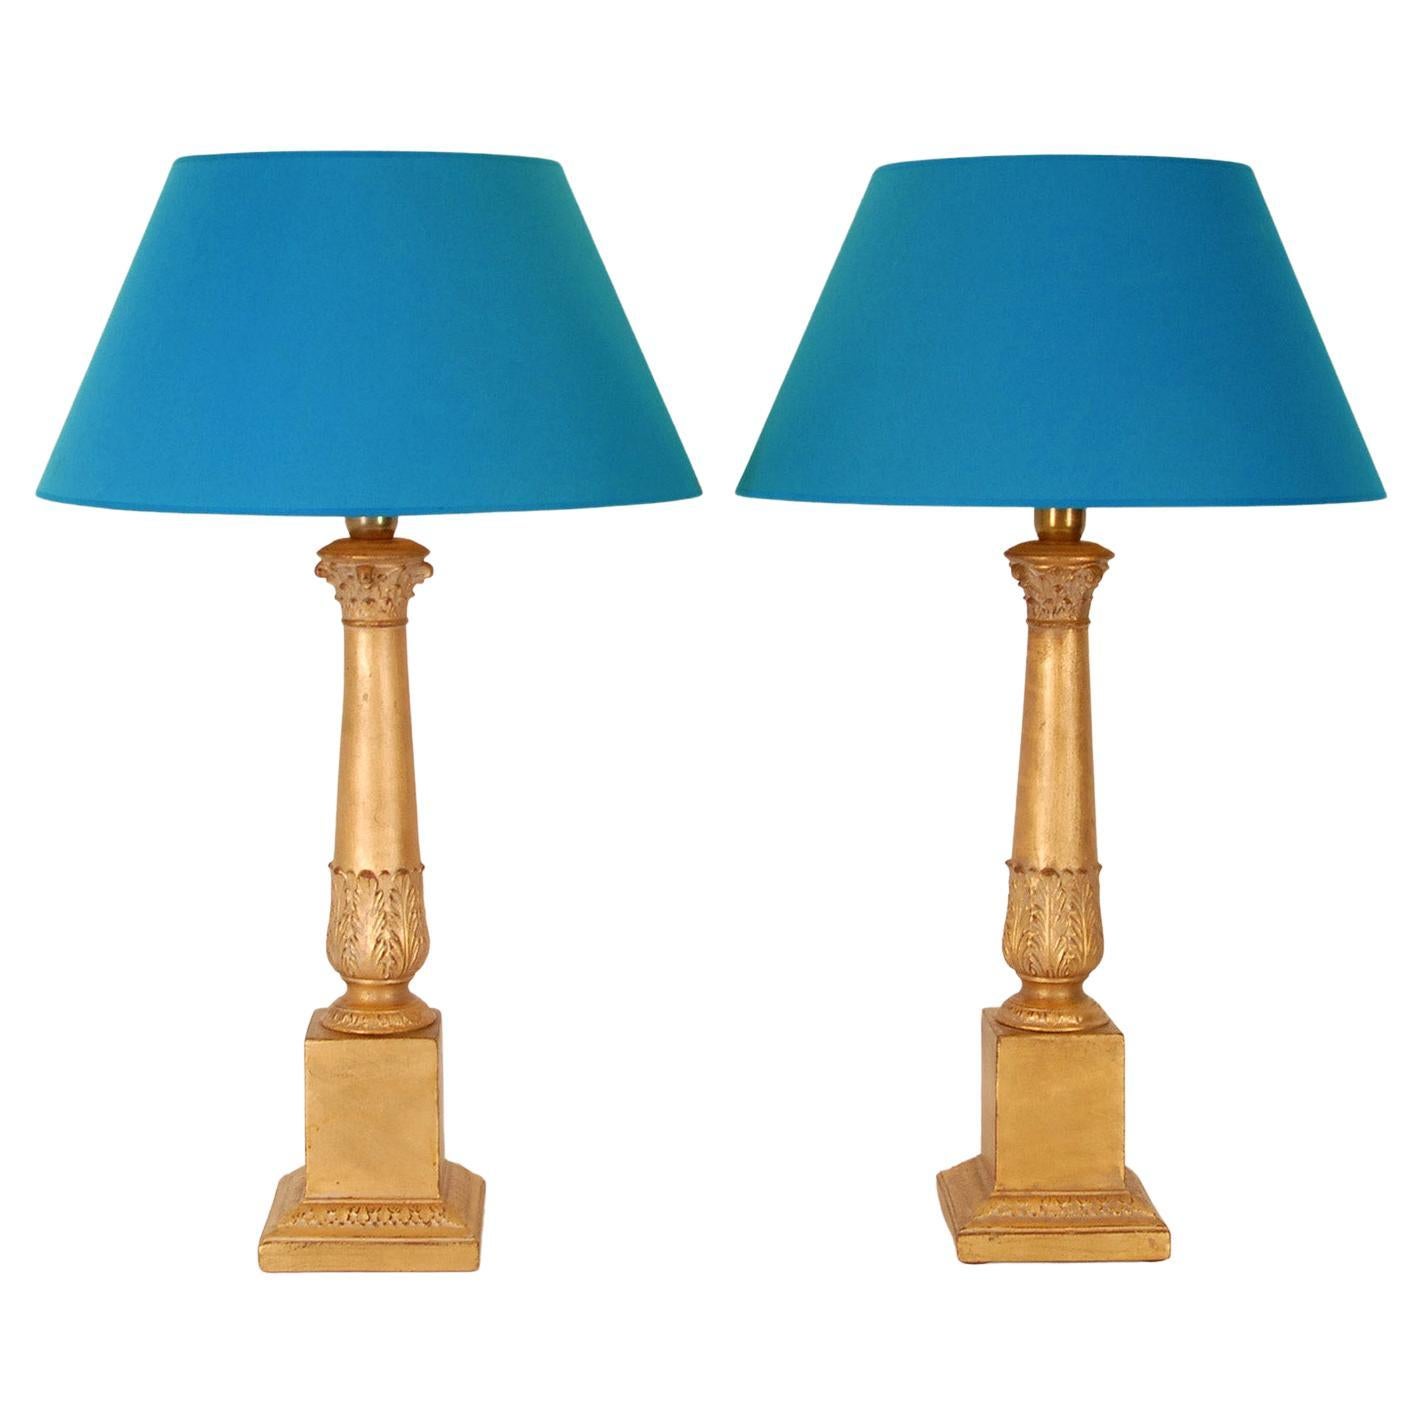 Vintage Italian Ceramic Lamps Gold Gilded Corinthian Column Table Lamps a Pair For Sale